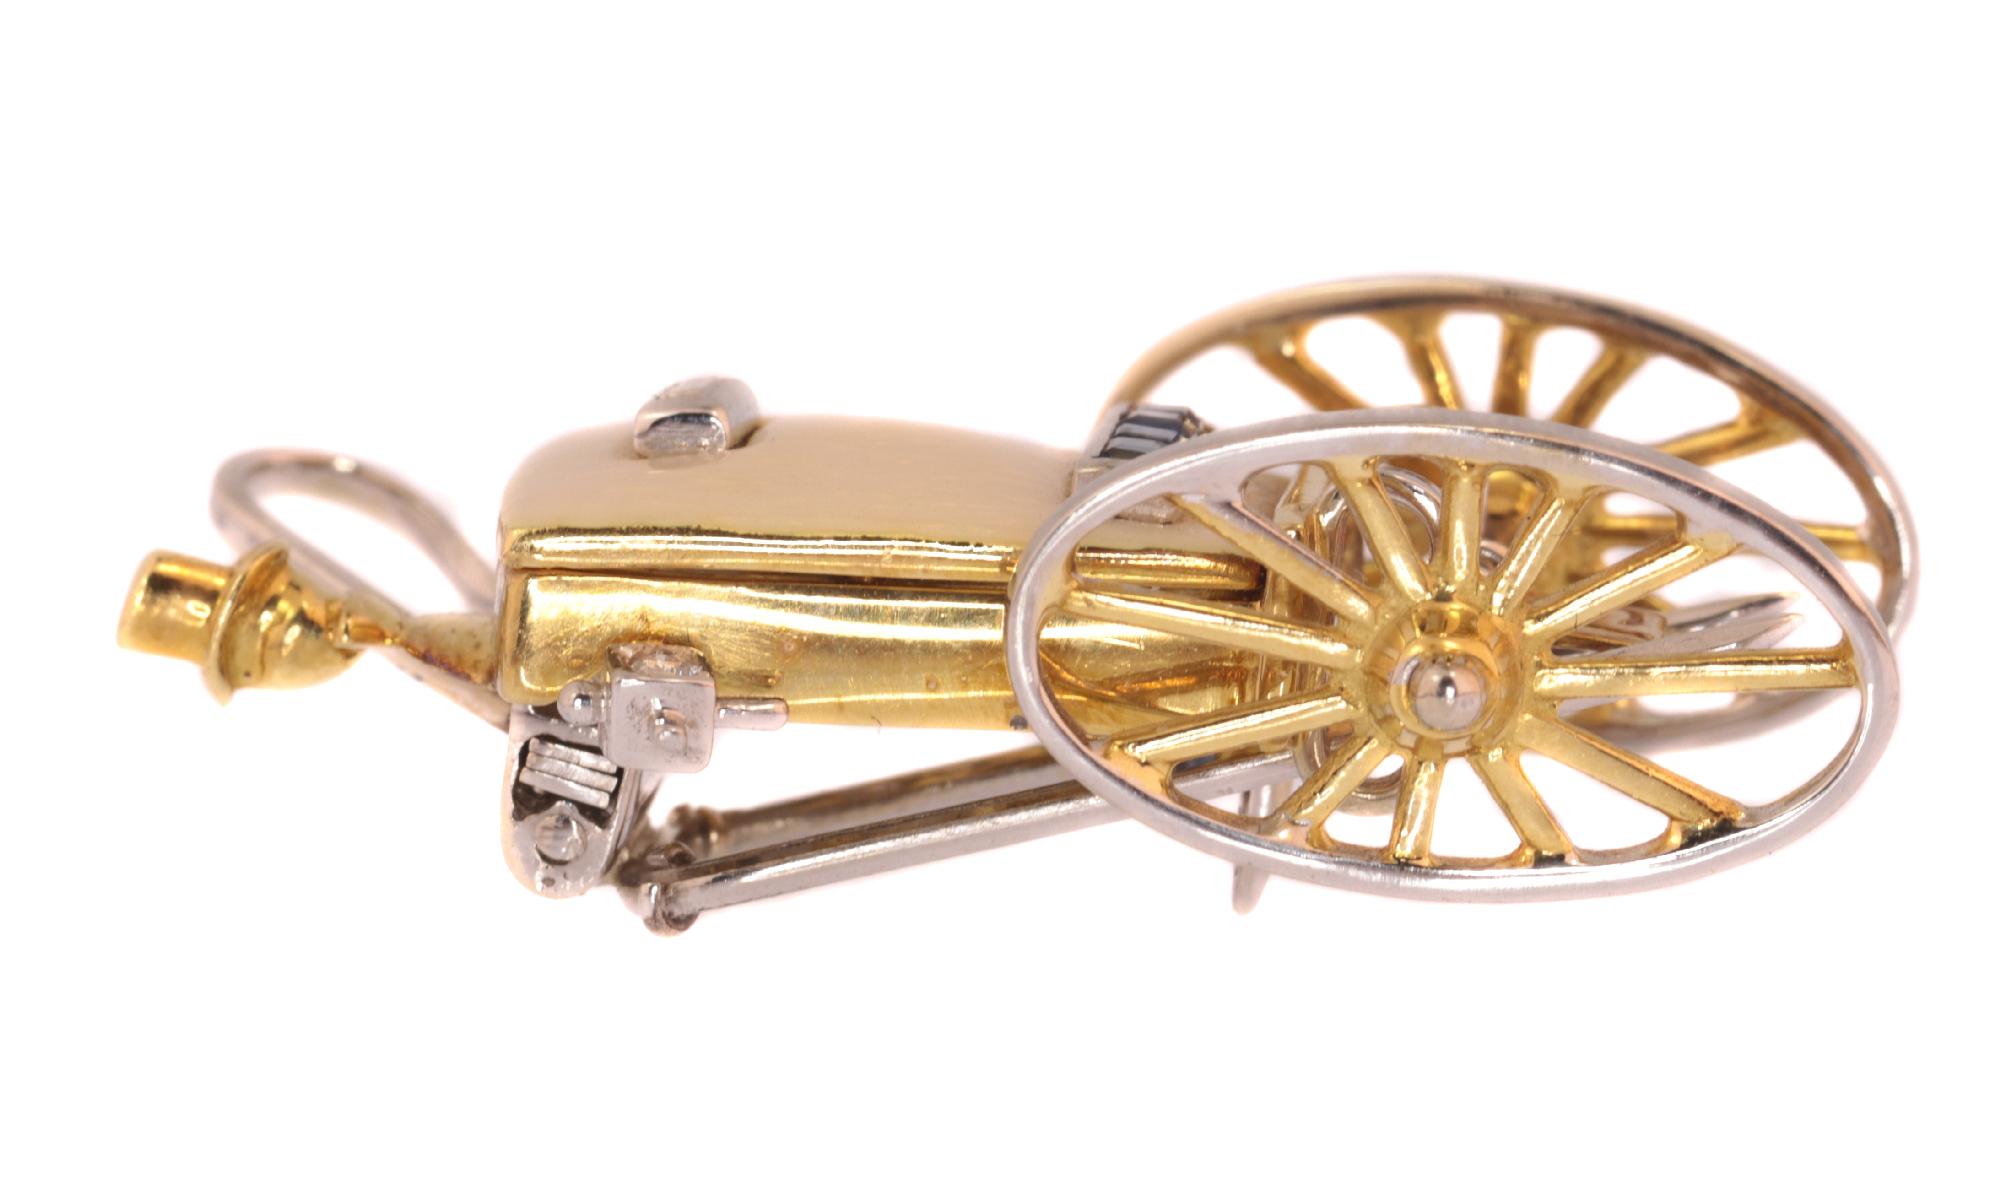 Whimsical Gold Brooch Carriage Typical Vintage 1950s Style Mellerio For Sale 3